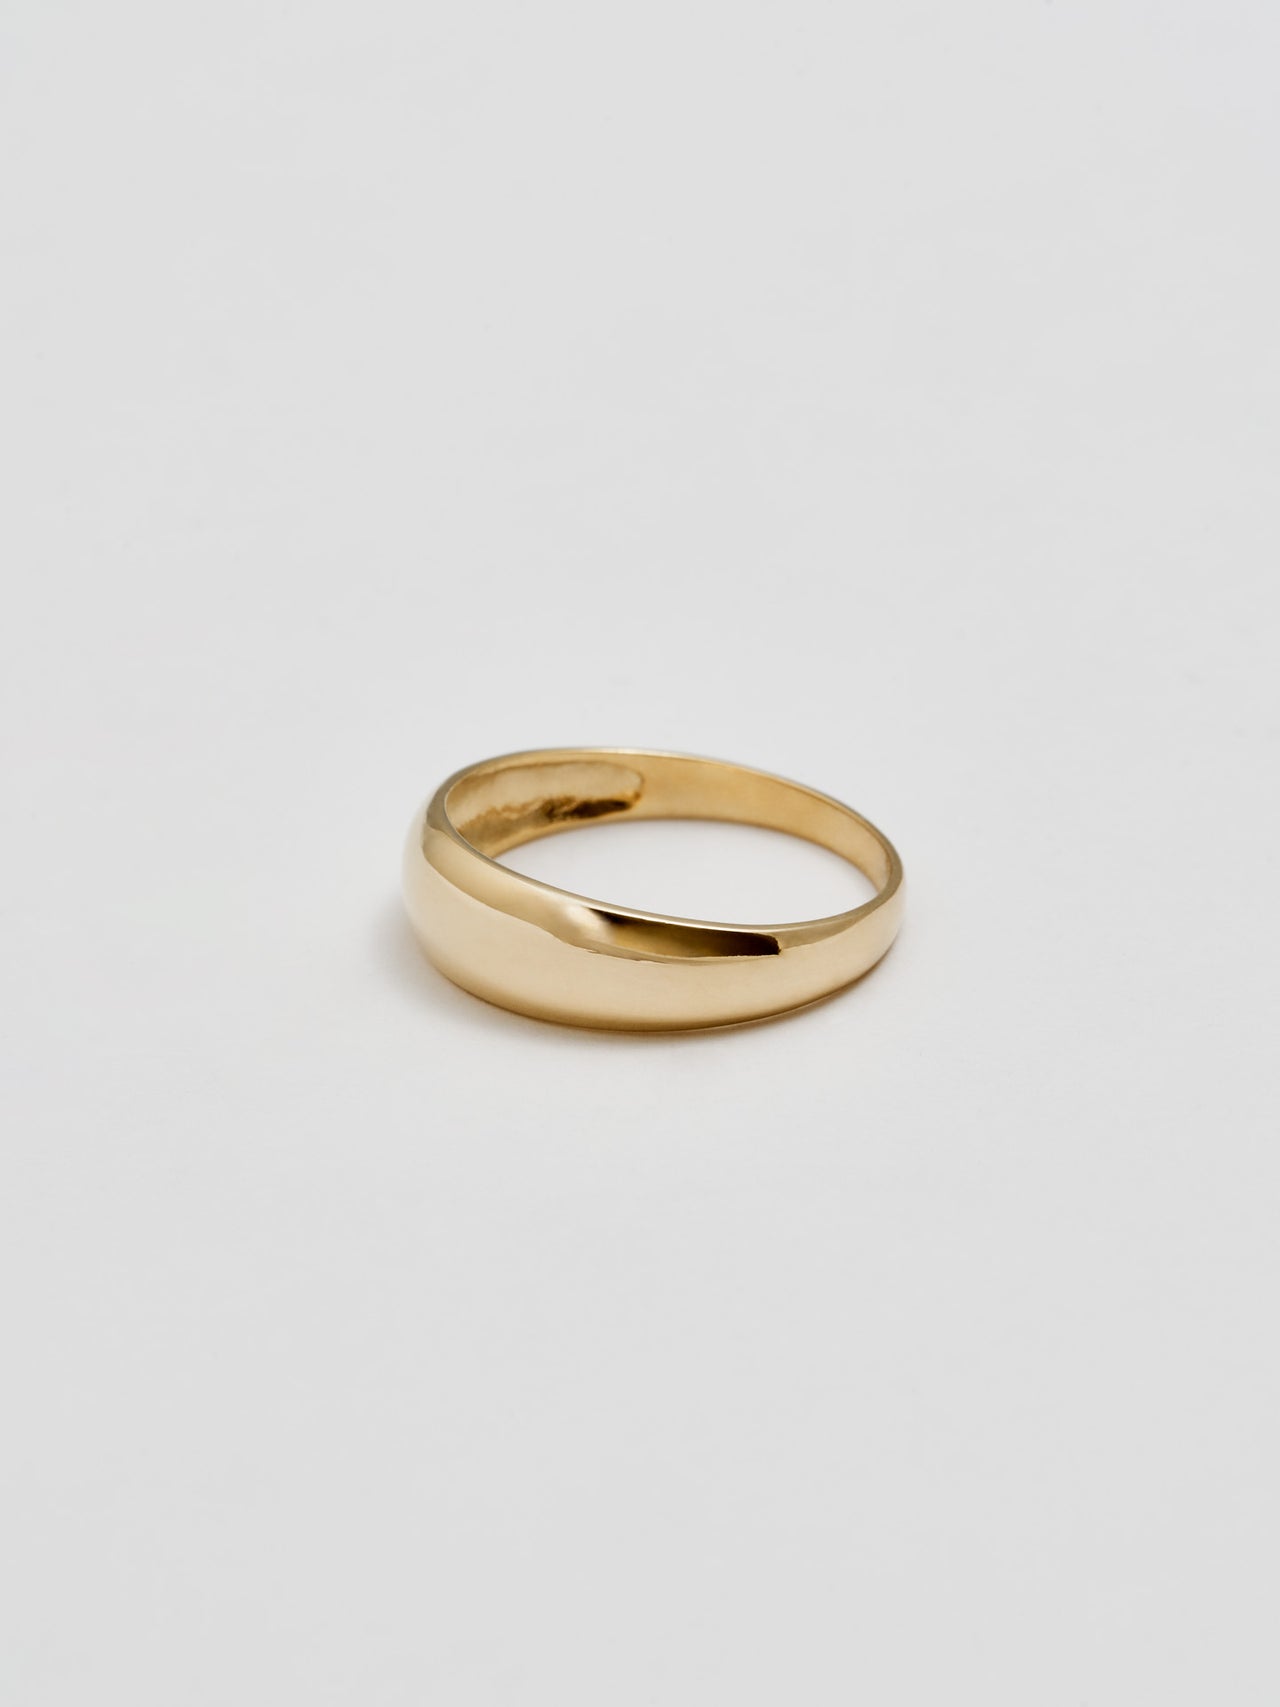 Product shot of the side of Baby Dome Ring (shiny 14Kt Yellow Gold Dome Ring Tapered Width) with white background.